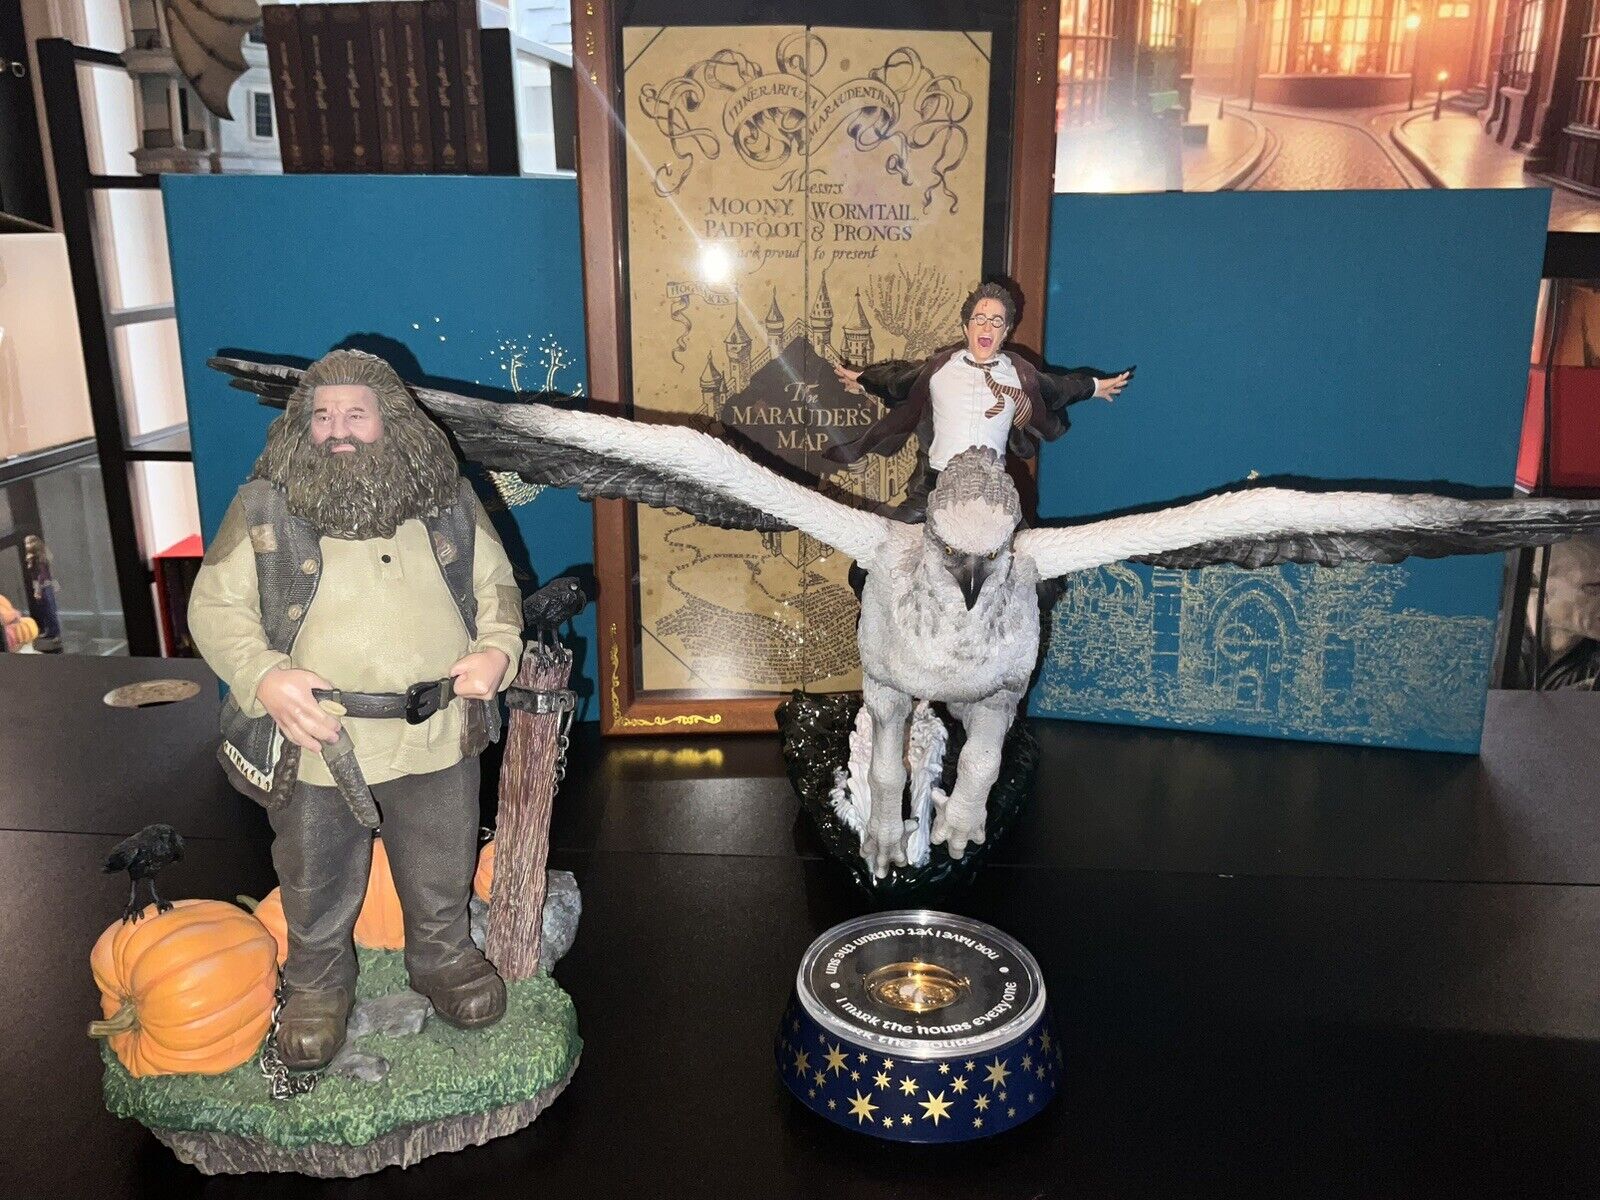 Very Special Harry Potter Prisoner of Azkaban statues + 1st Edition Illustrated